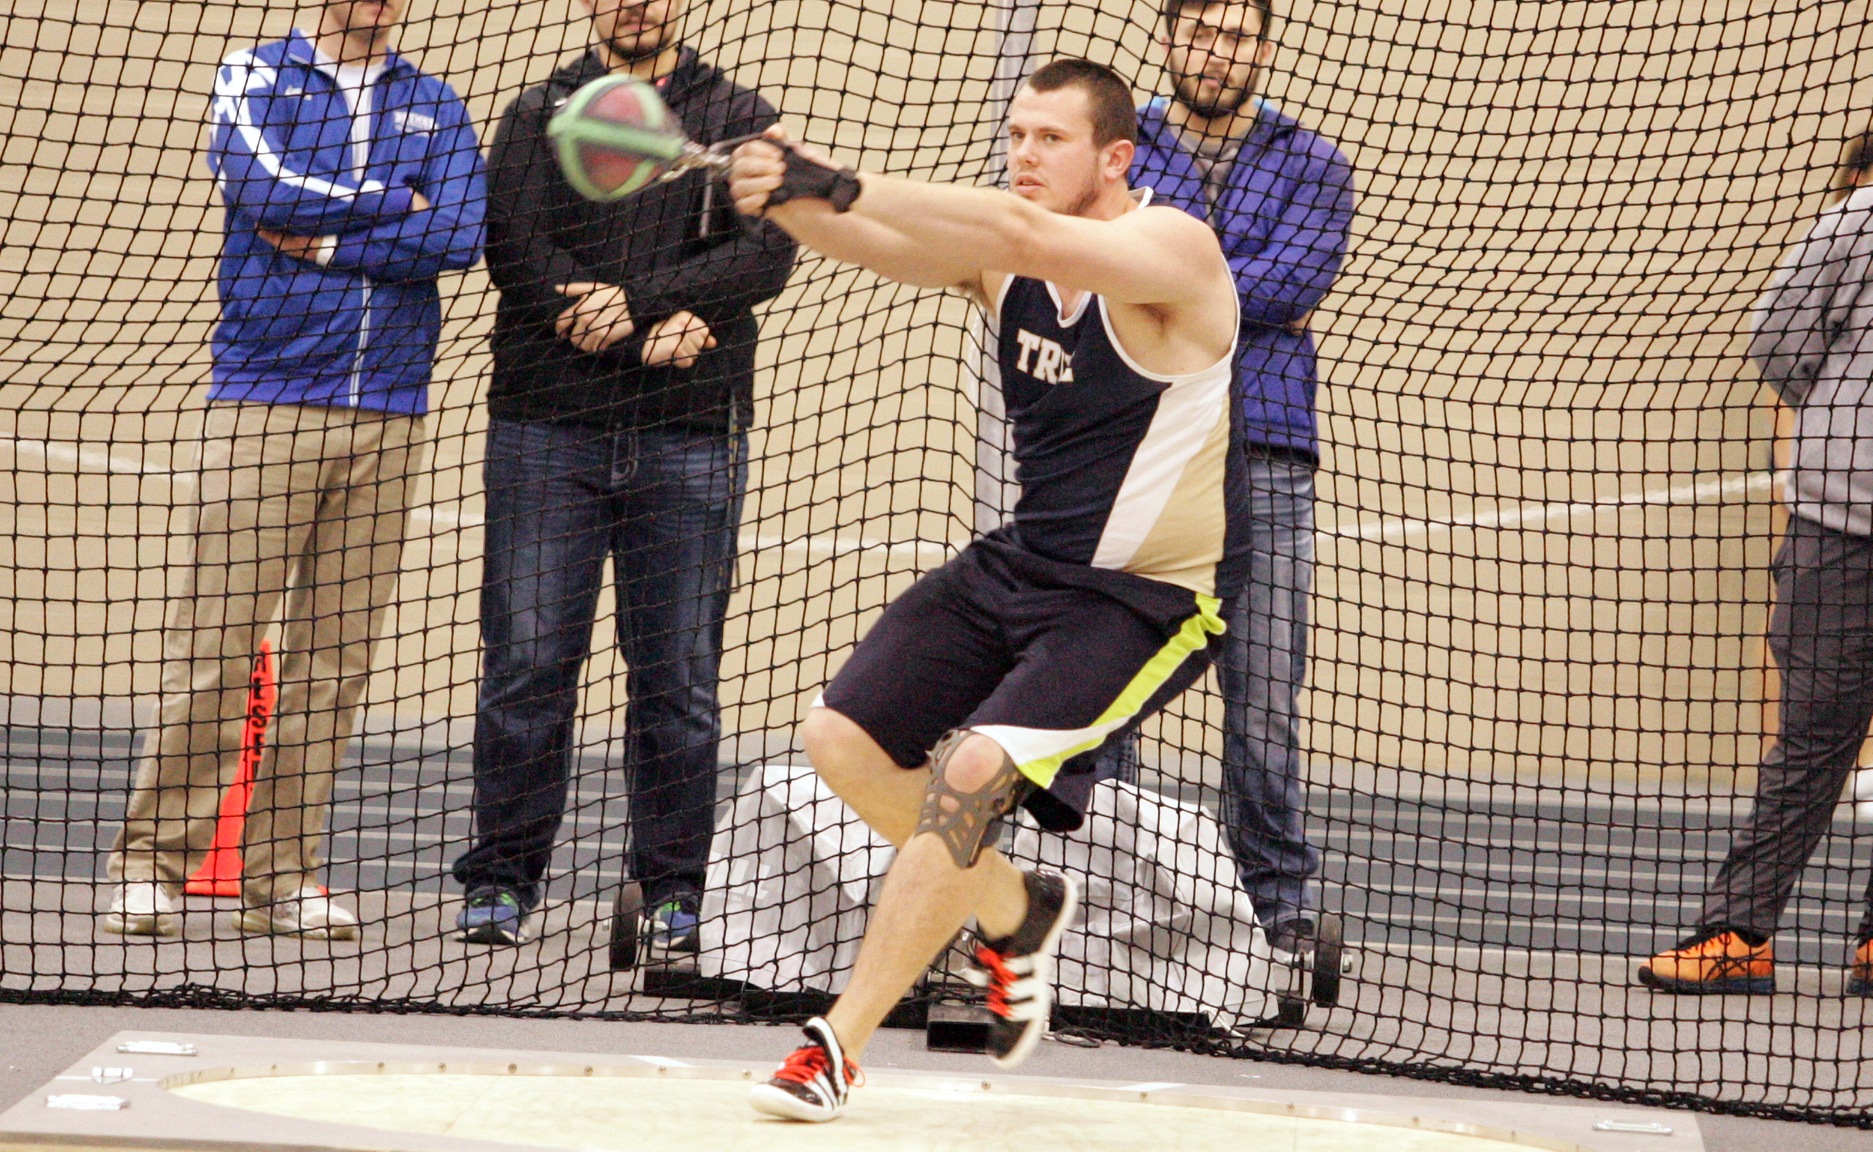 Bunting Wins Weight Throw at Hillsdale Tune-Up